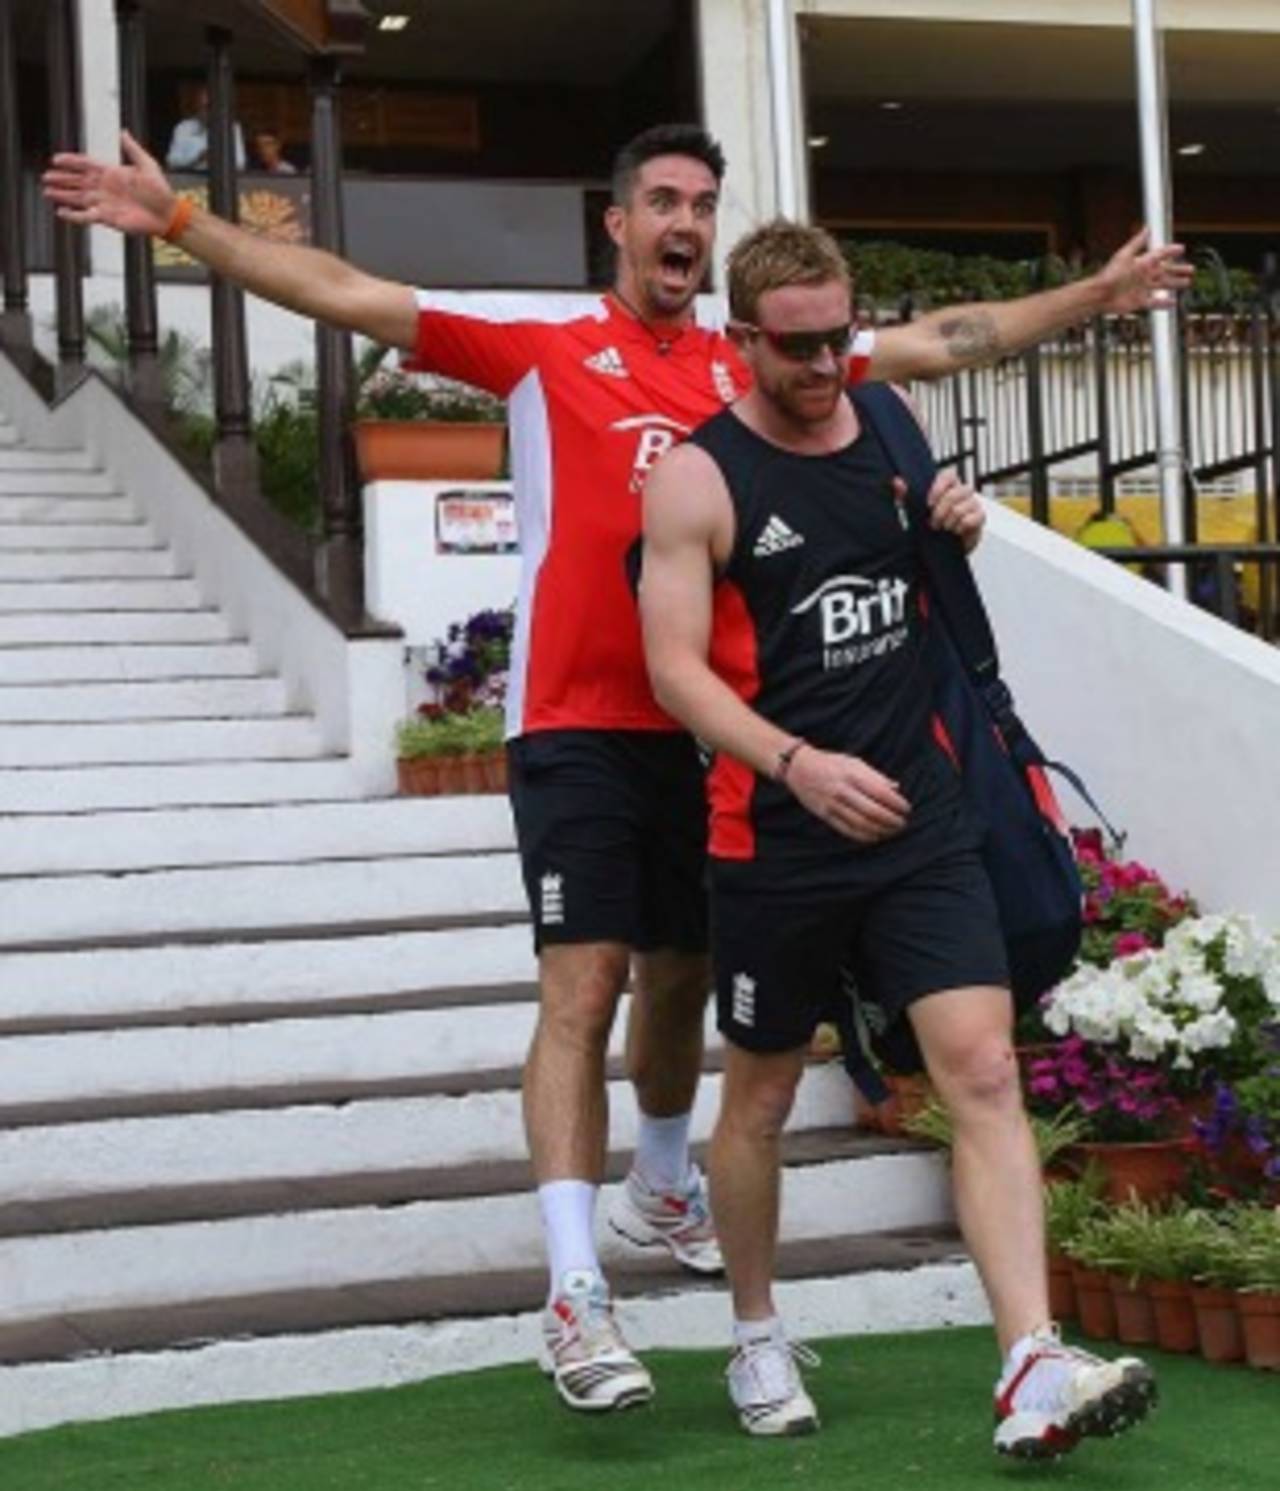 Kevin Pietersen has a bit of fun with Paul Collingwood, Nagpur, February 21, 2011